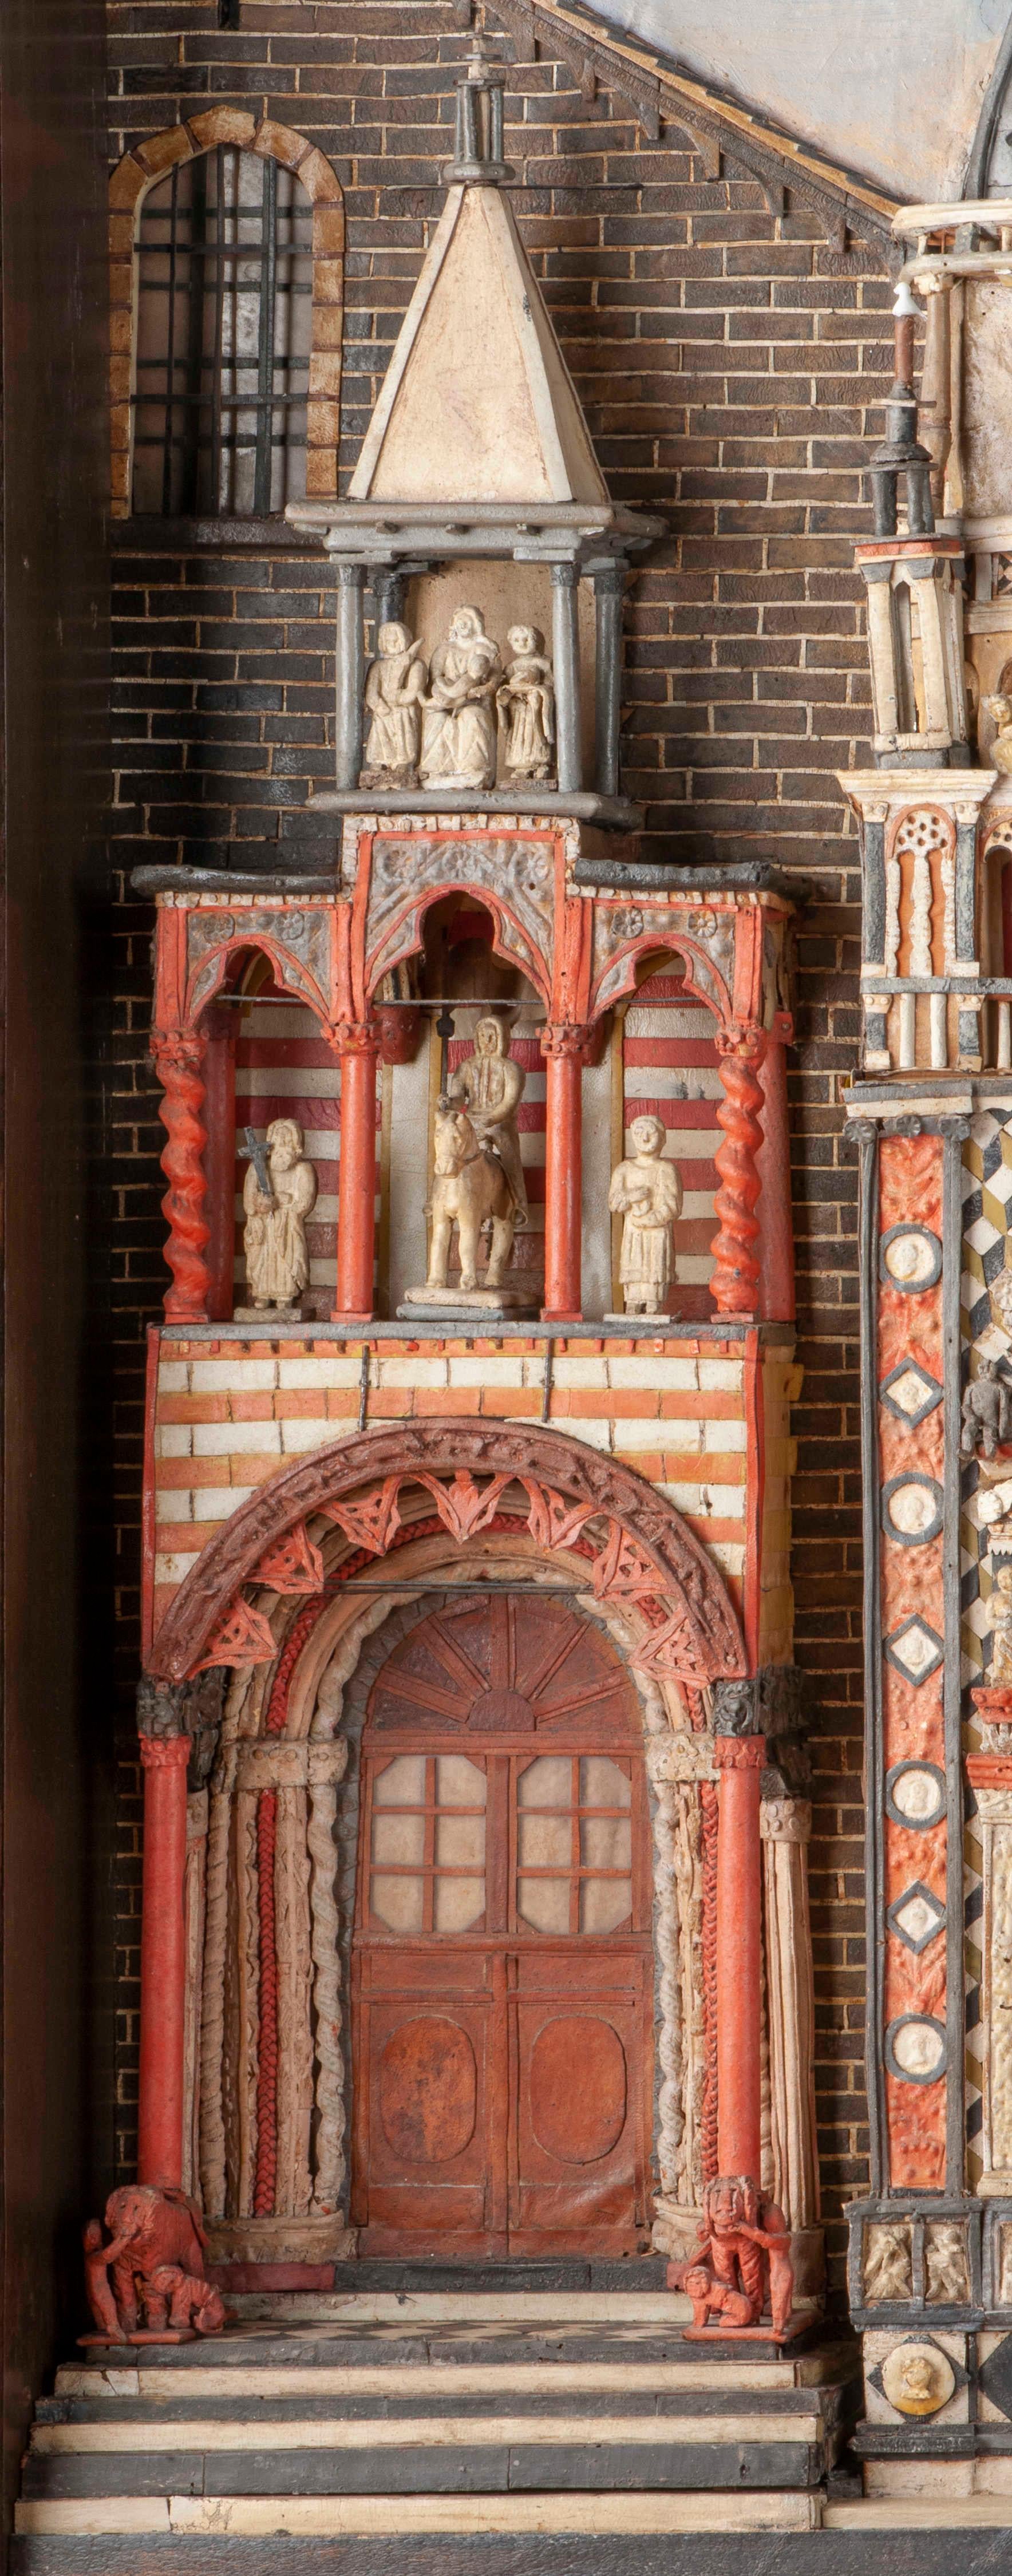 Metal The Colleoni Chapel - Model made of wood, paper, tablet and various materials. For Sale